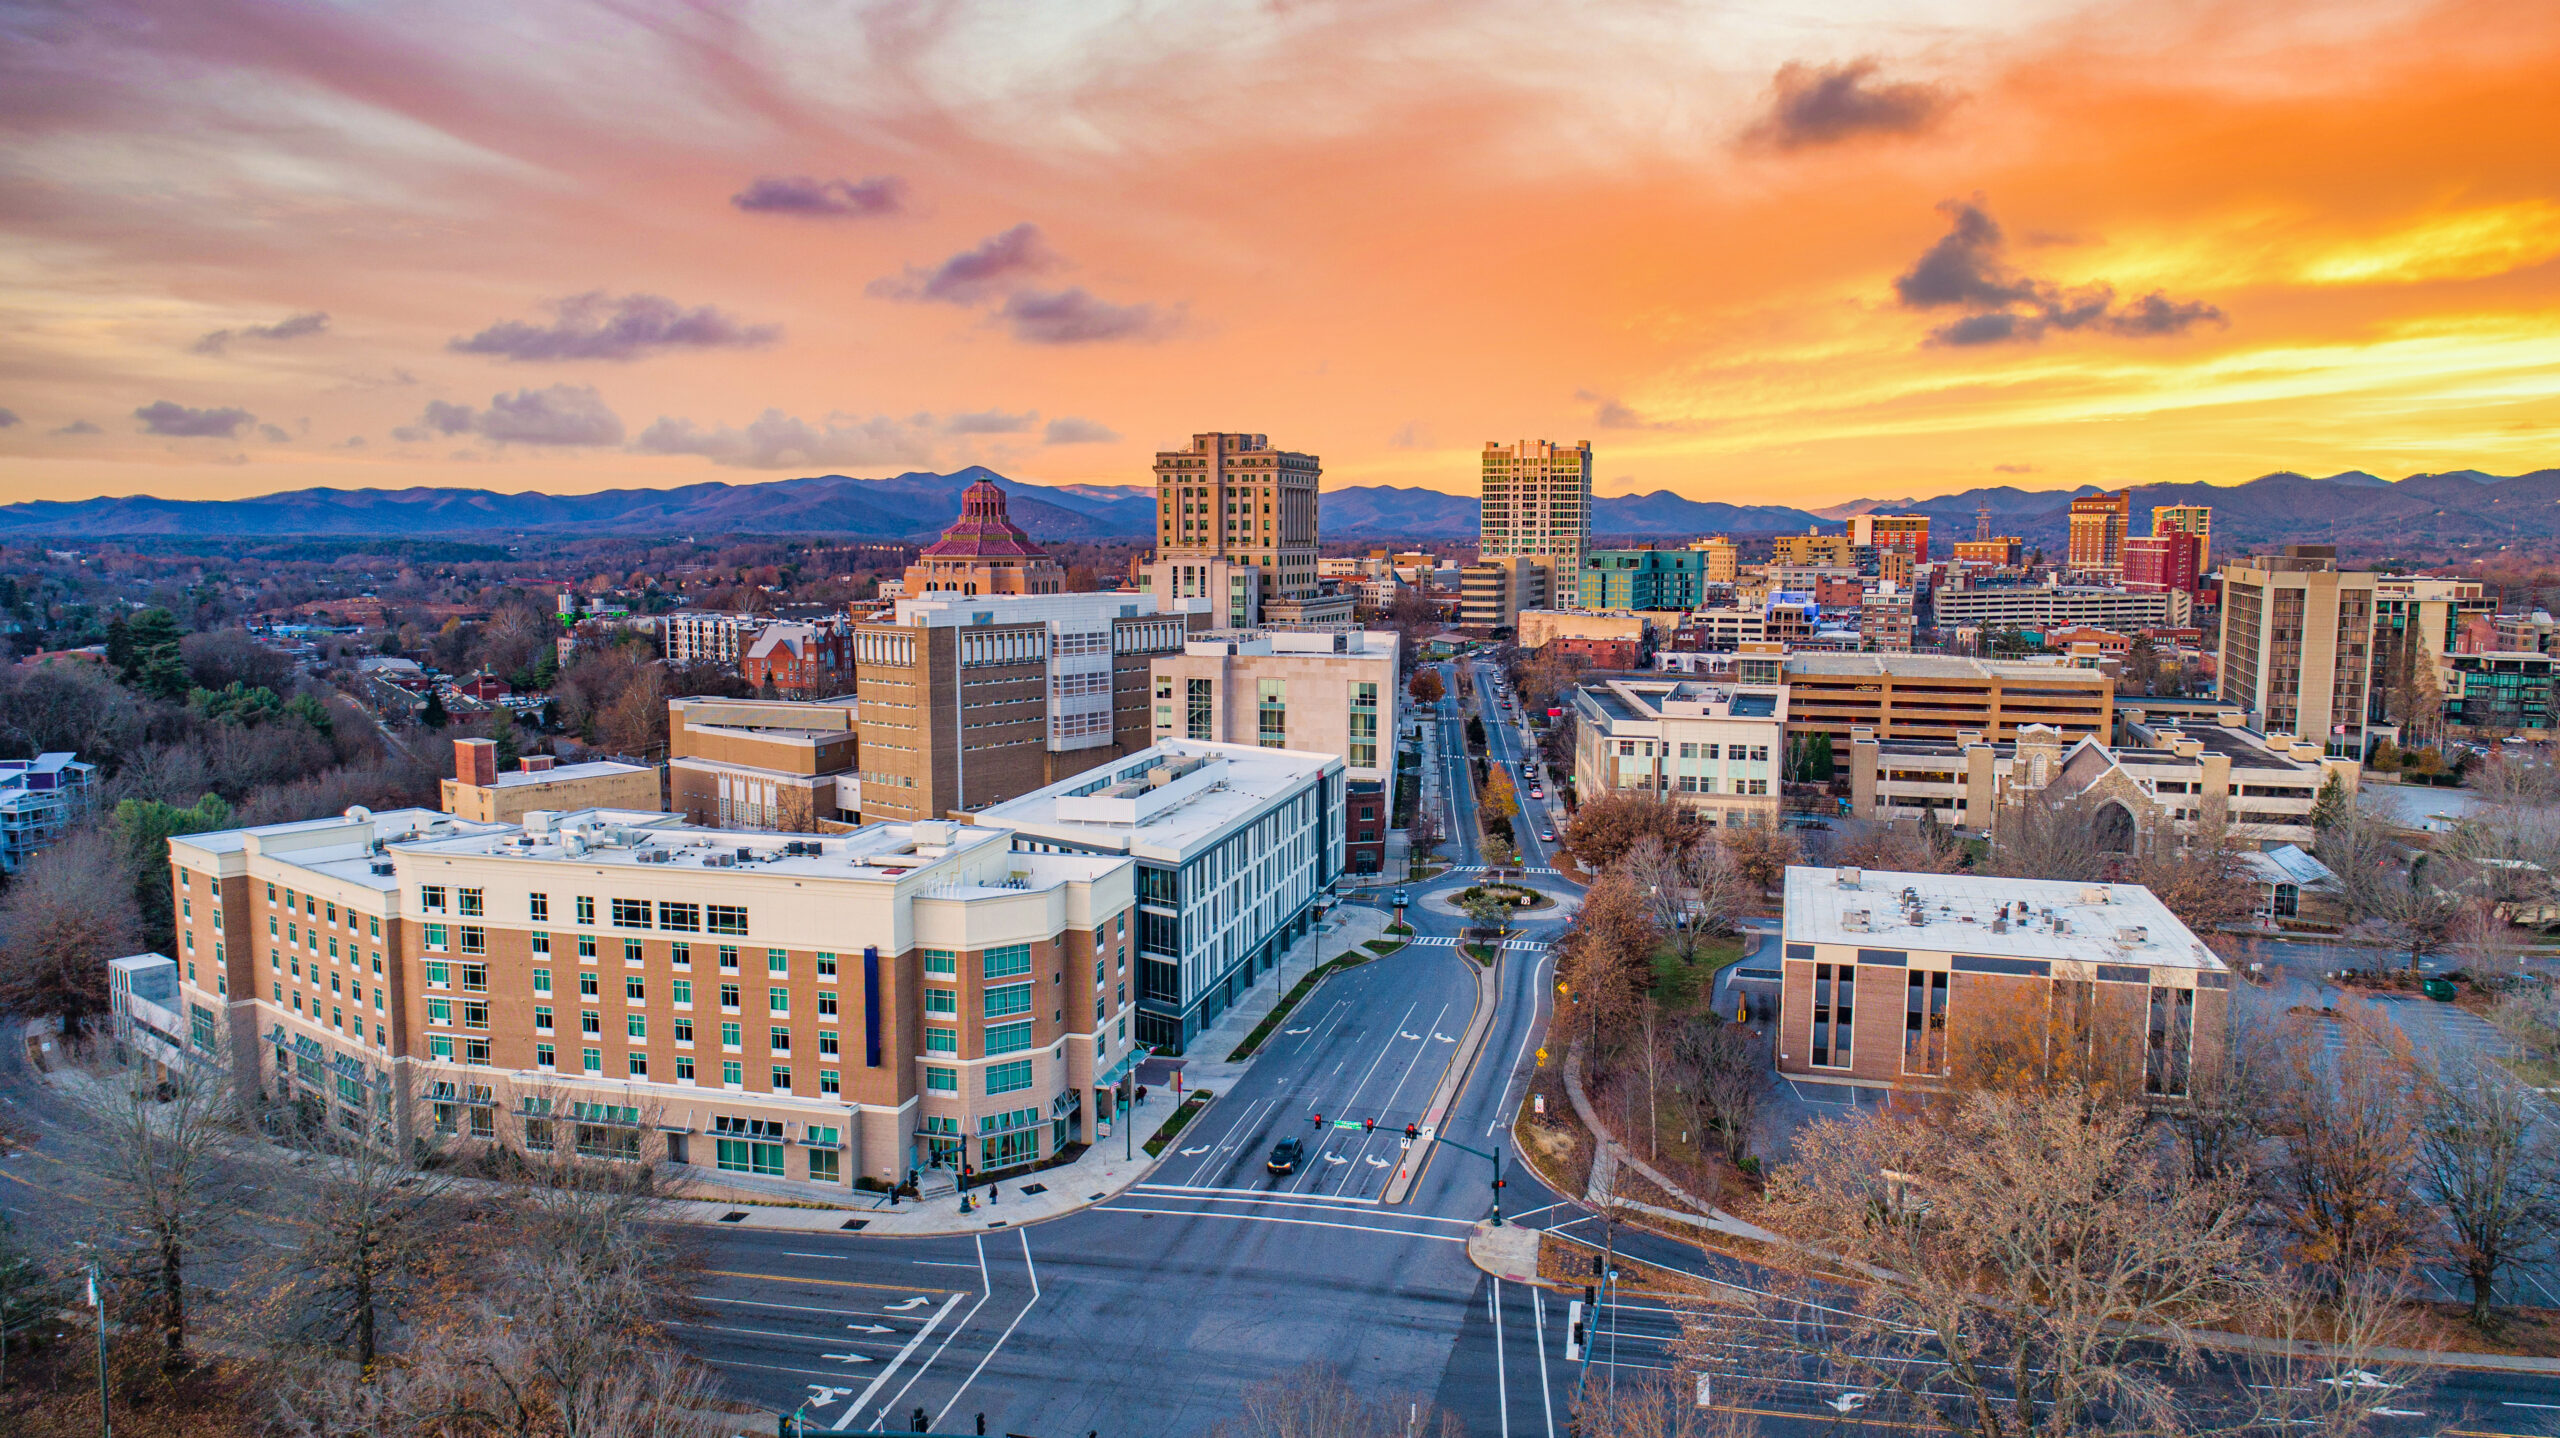 the city of Asheville at sunset, a round about can be seen in between buildings, there are mountains in the background 